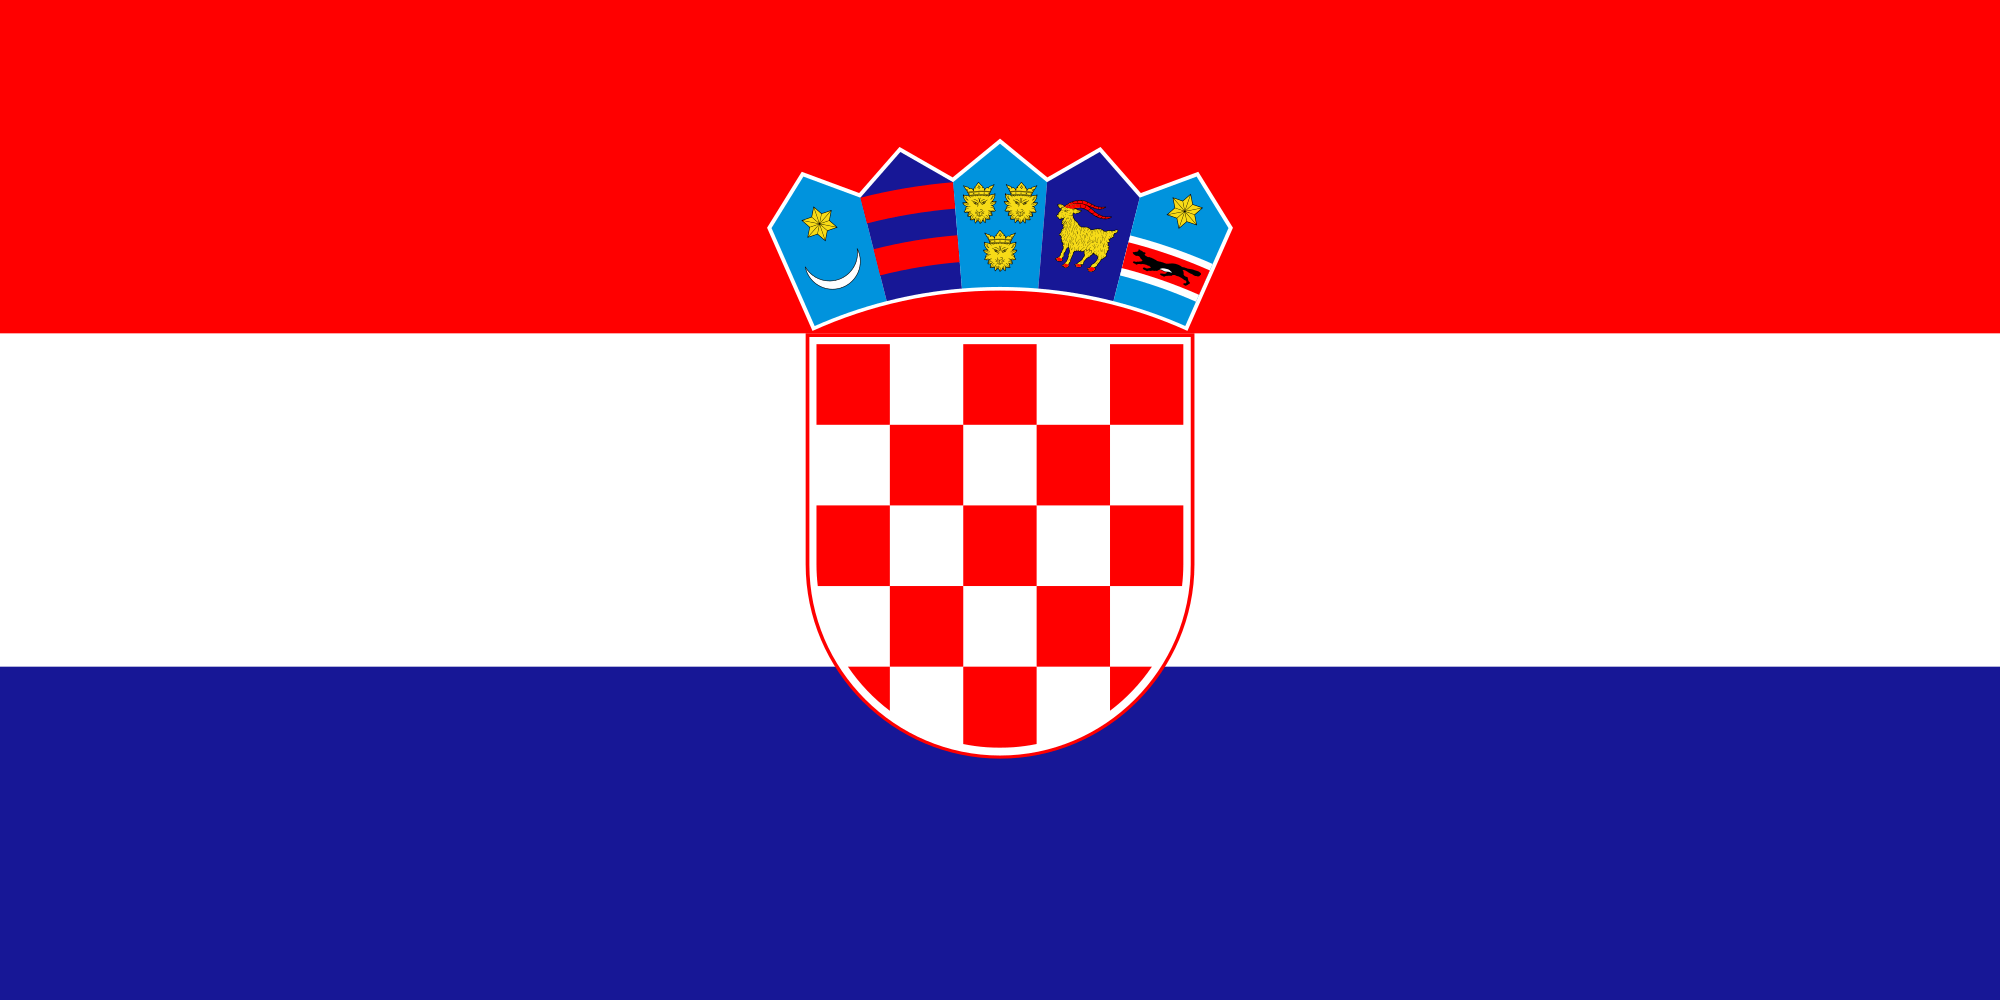 Sport Red White and Blue Shield Logo - Flag of Croatia